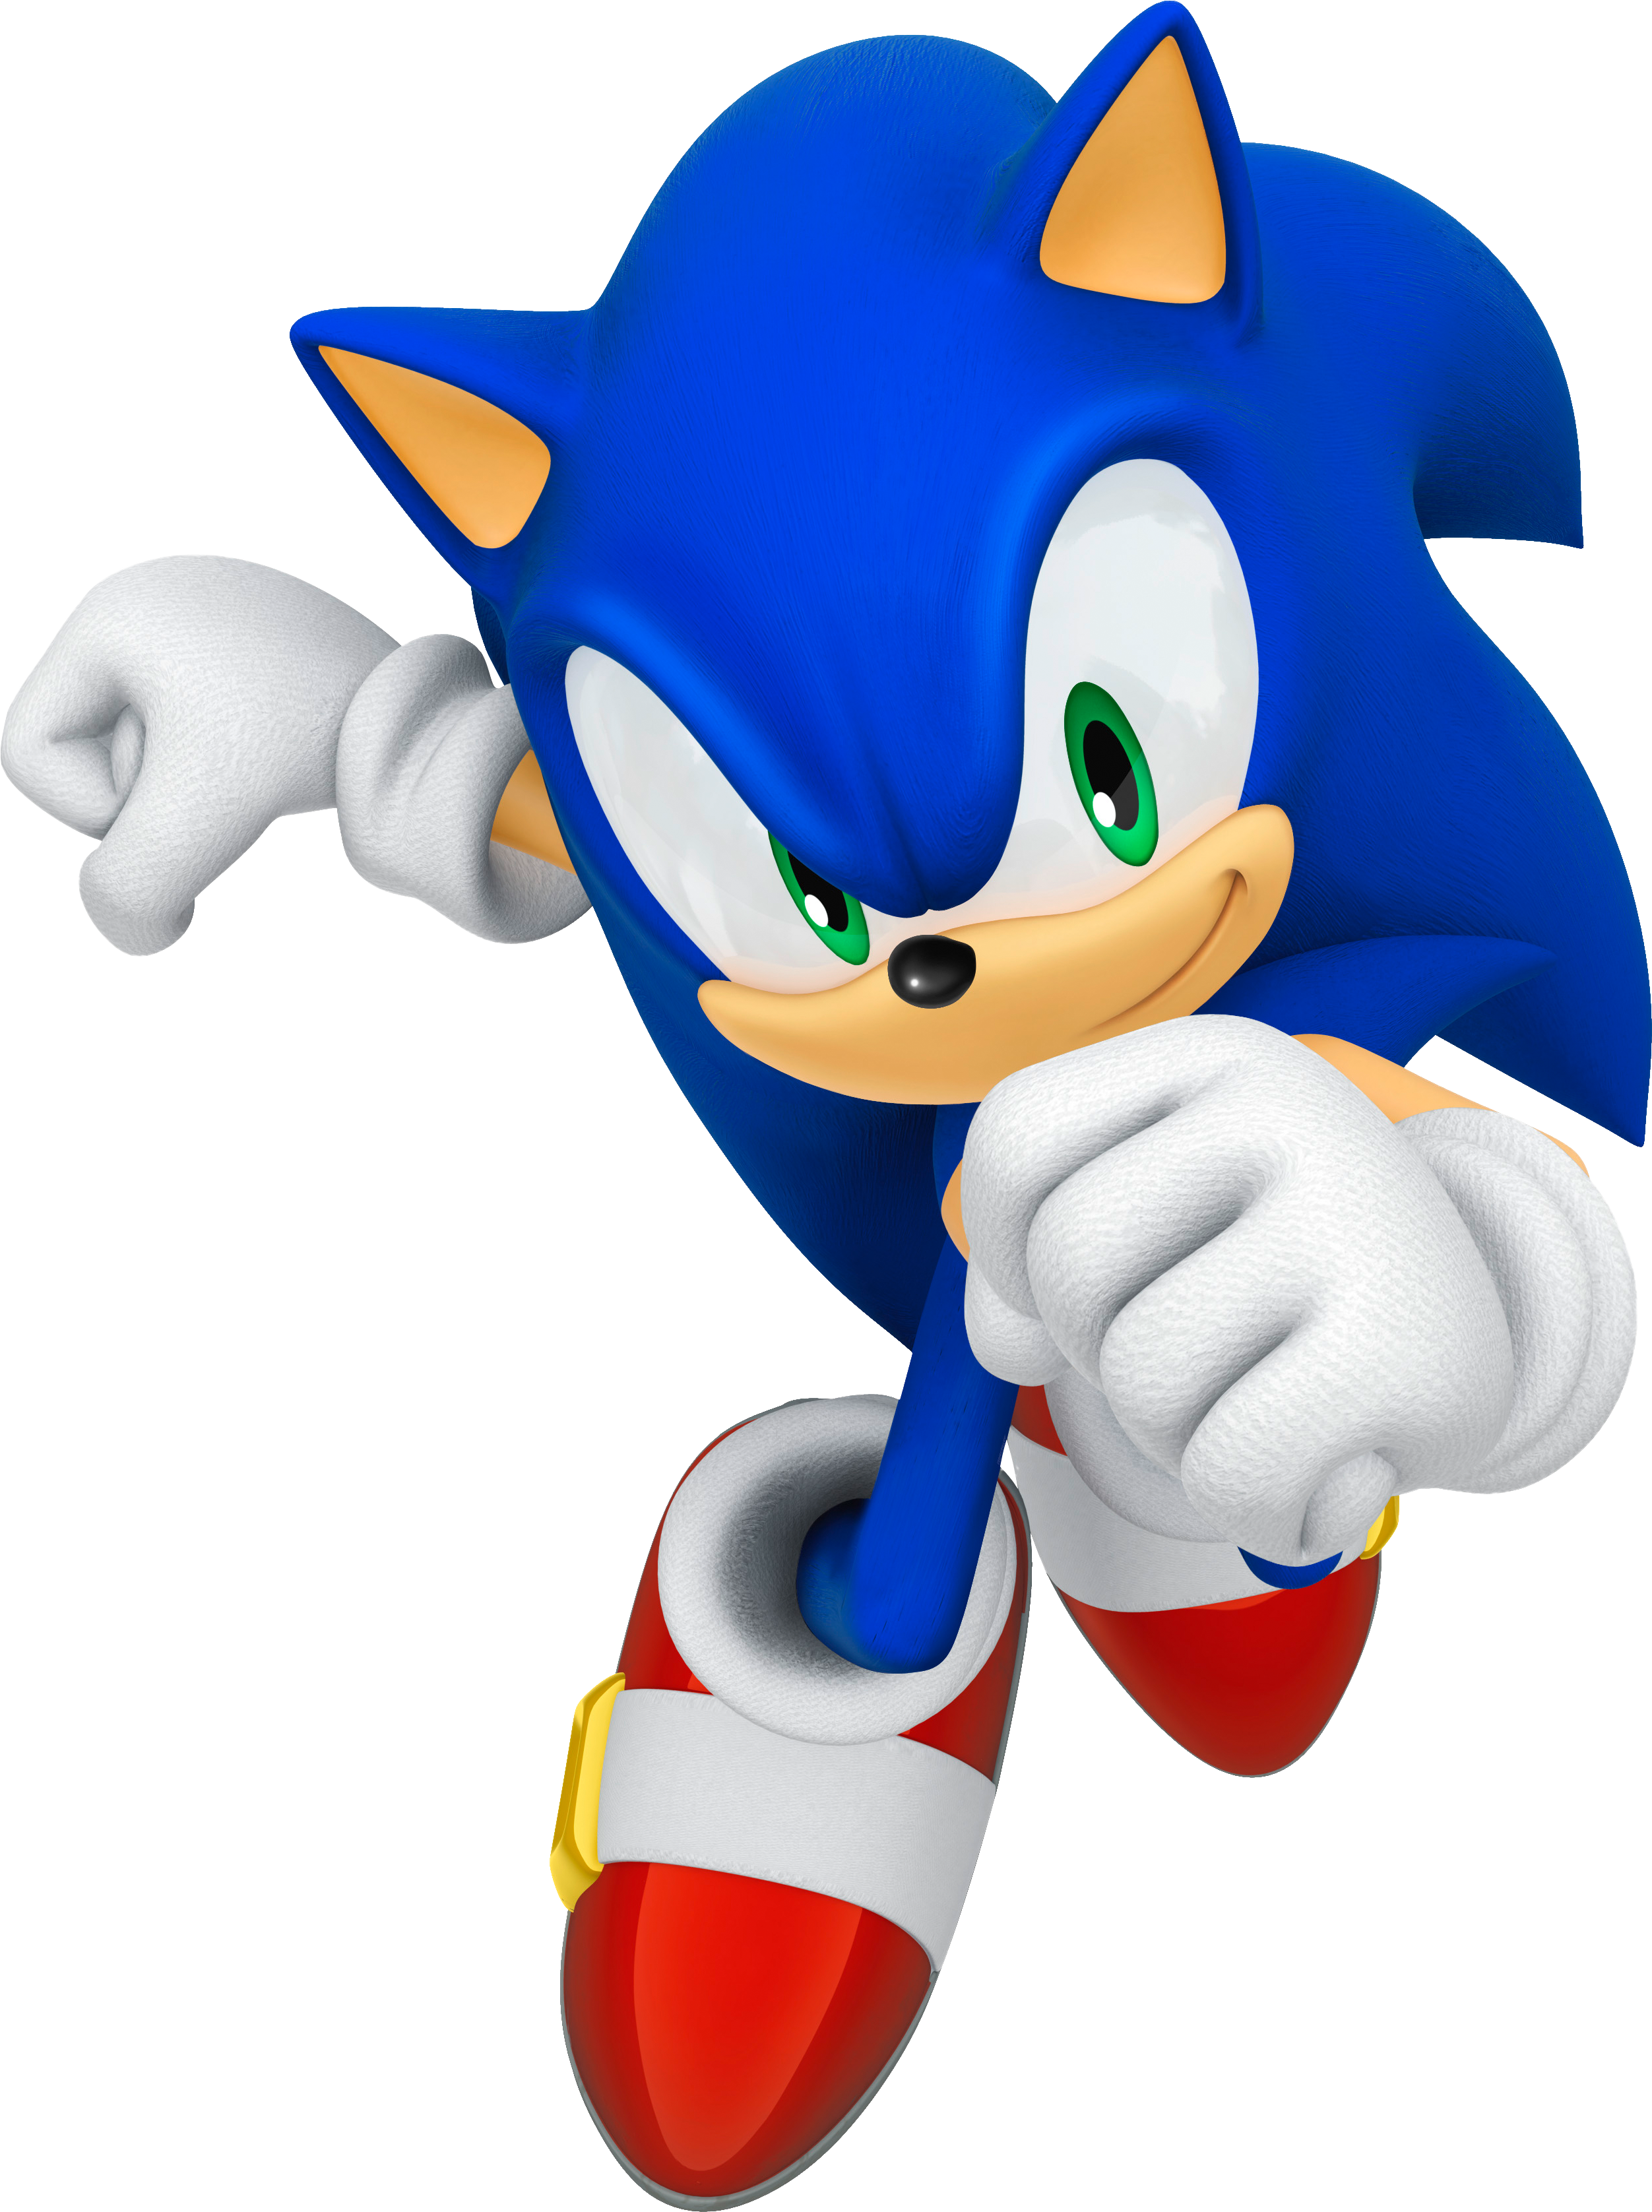 http://images2.wikia.nocookie.net/sonic/images/f/f5/Sonic_144.png